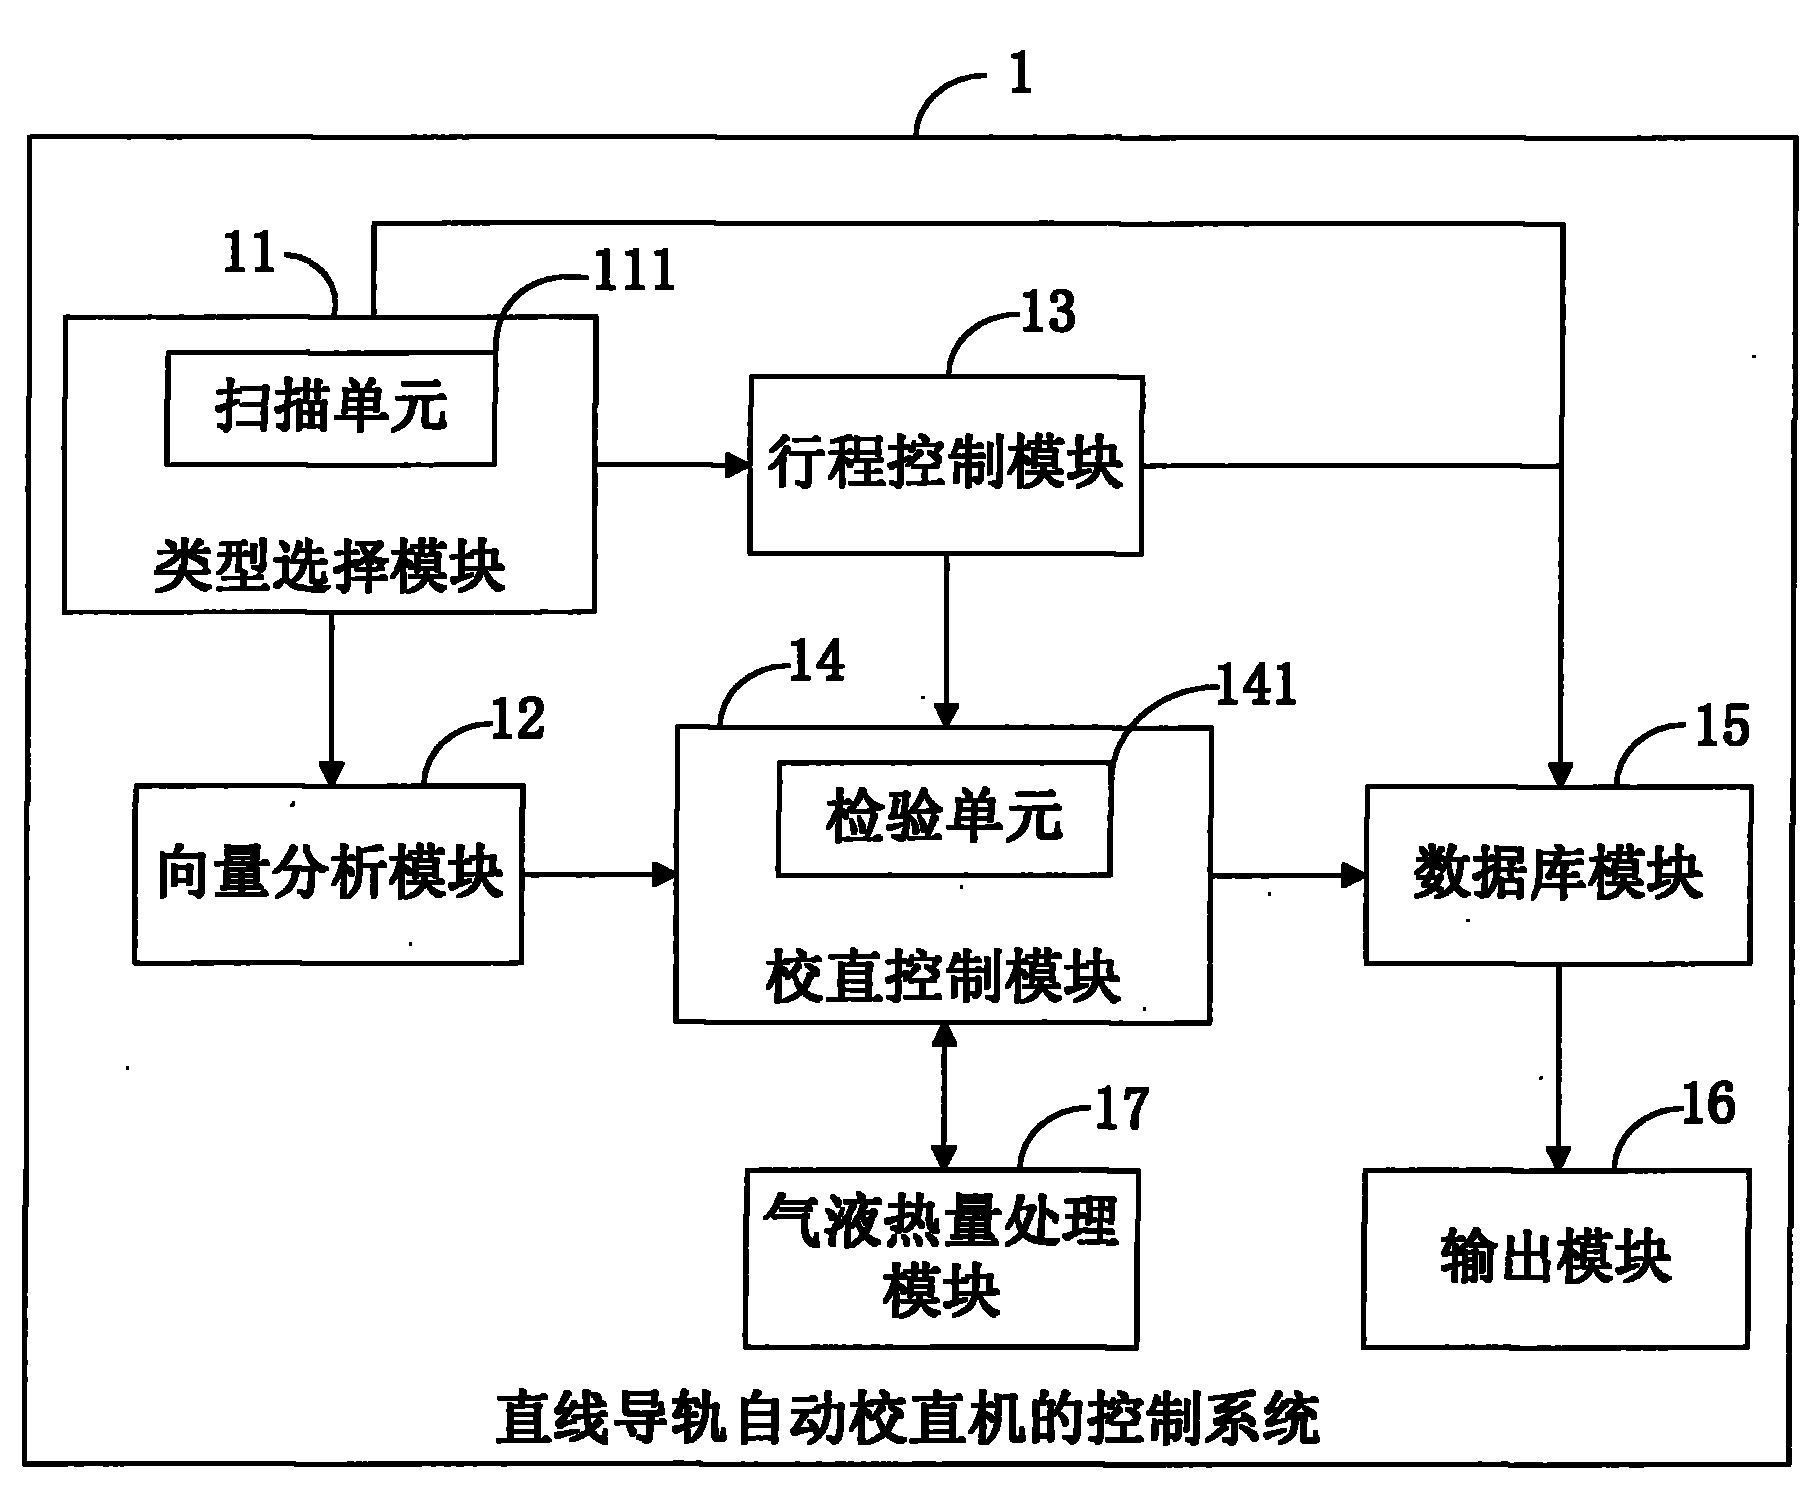 Control system of automatic straightener for linear guide rails